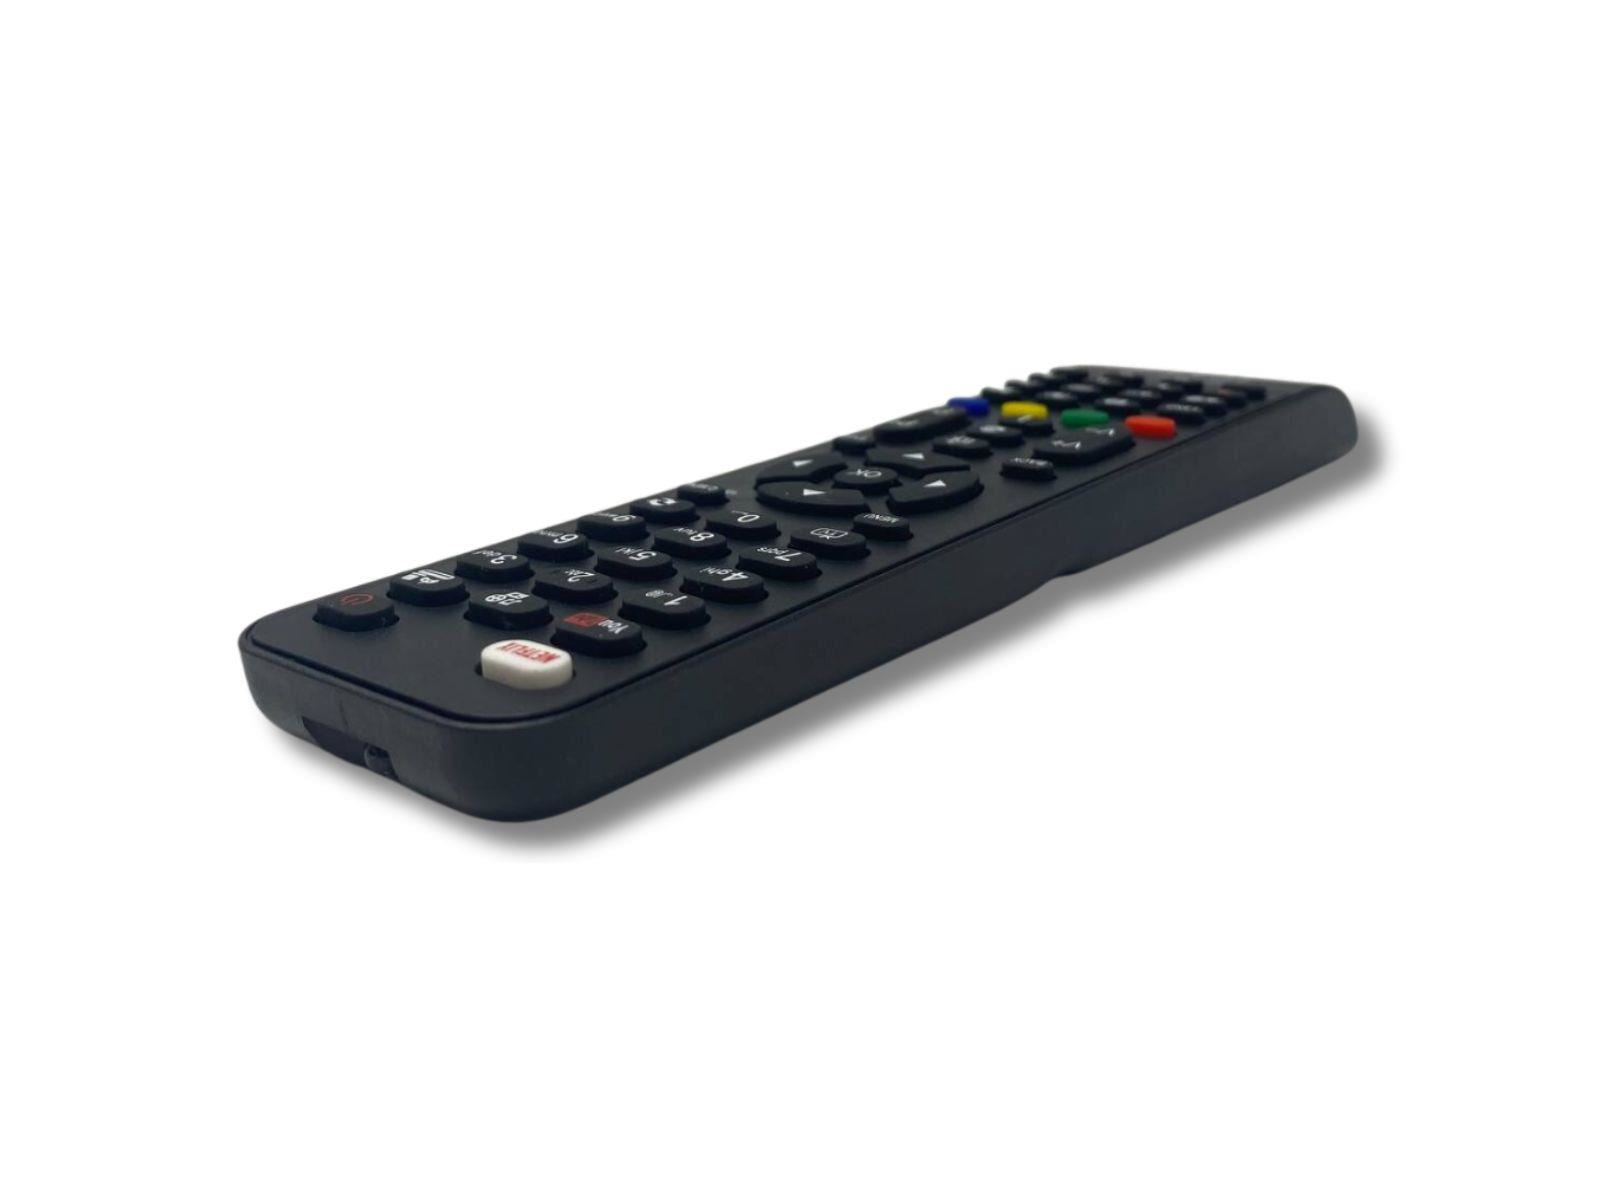 Image shows an angled side view of the replacement remote control